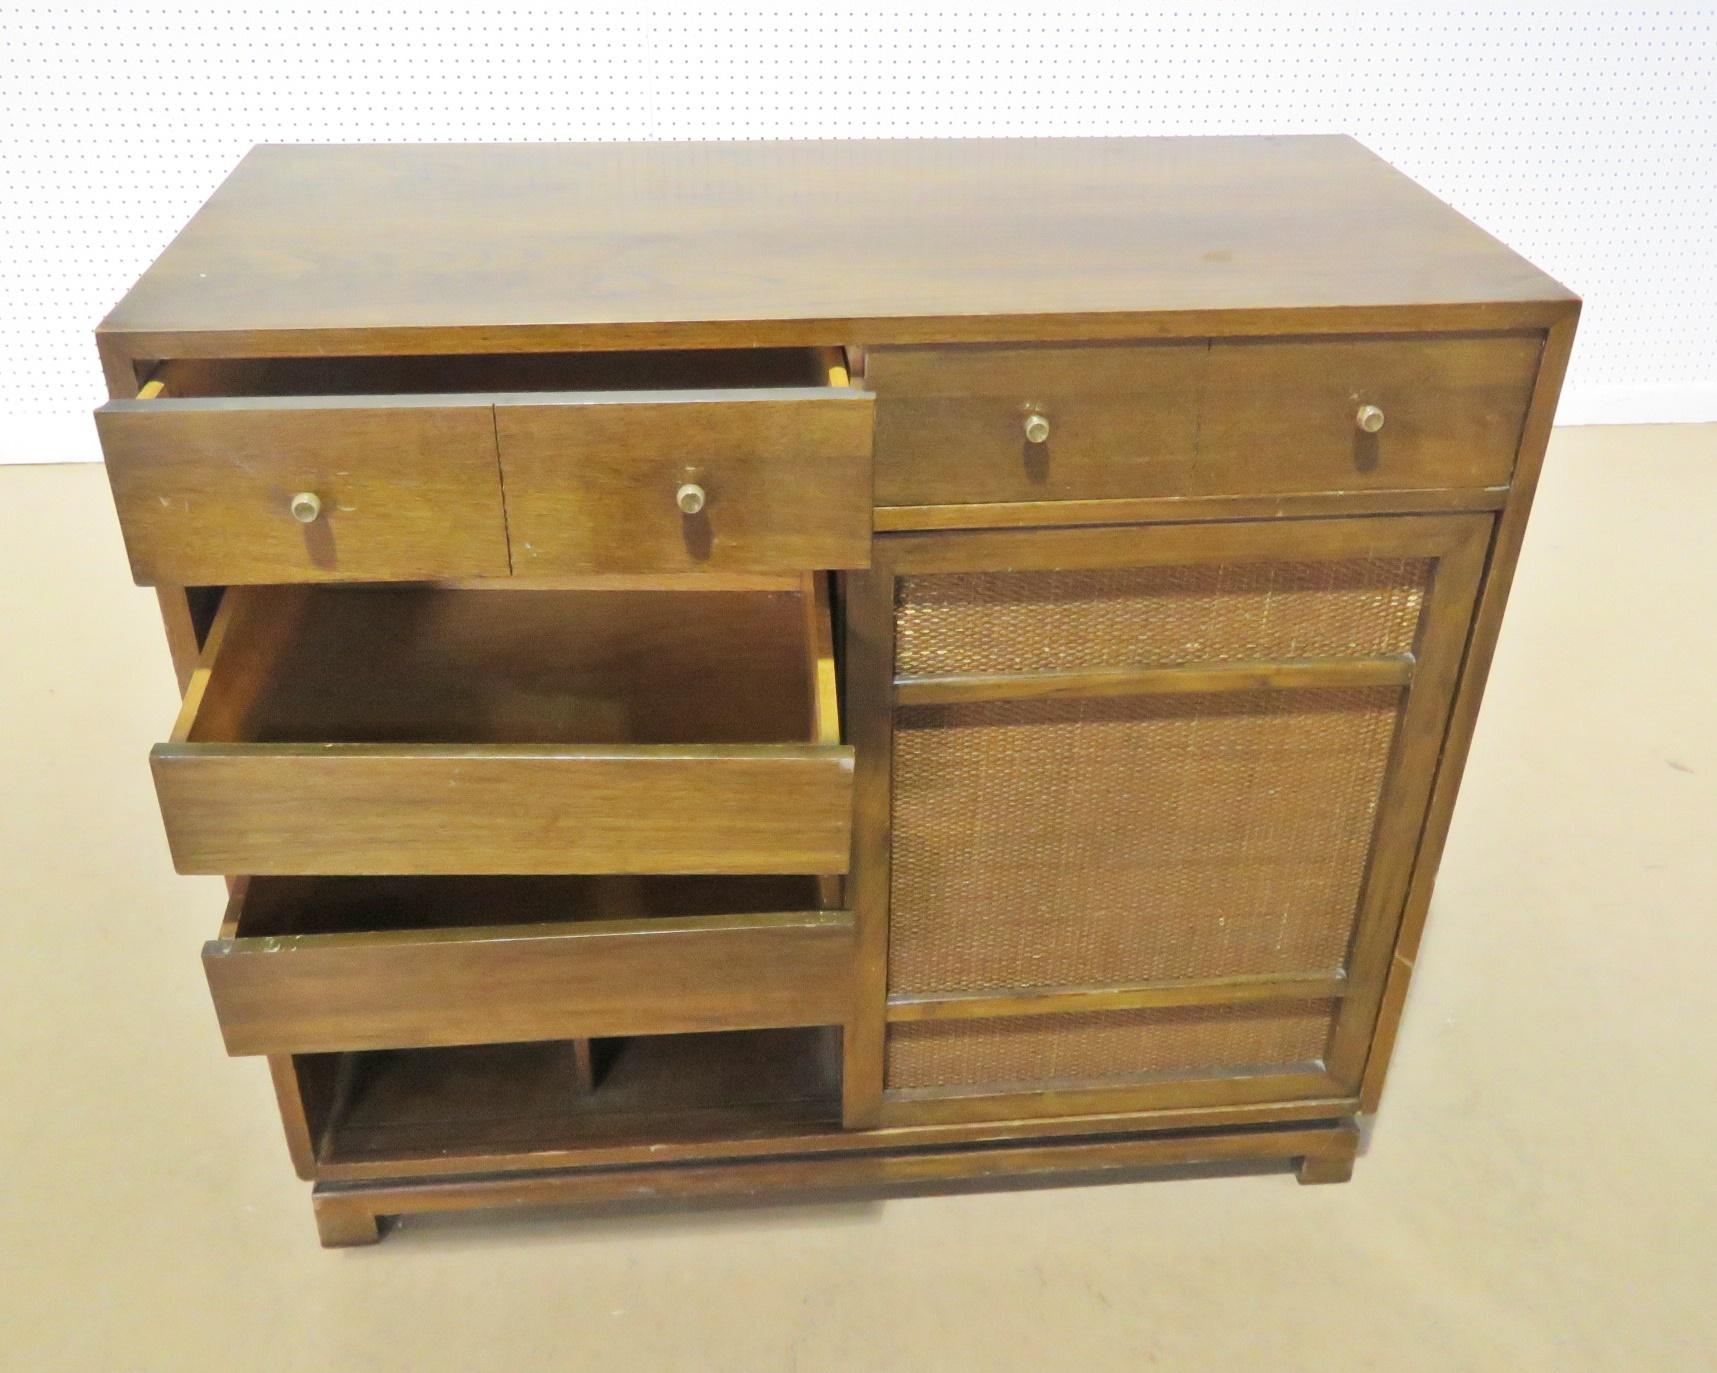 American of Martinsville server with 2 drawers over 2 rattan doors containing 2 shelves.